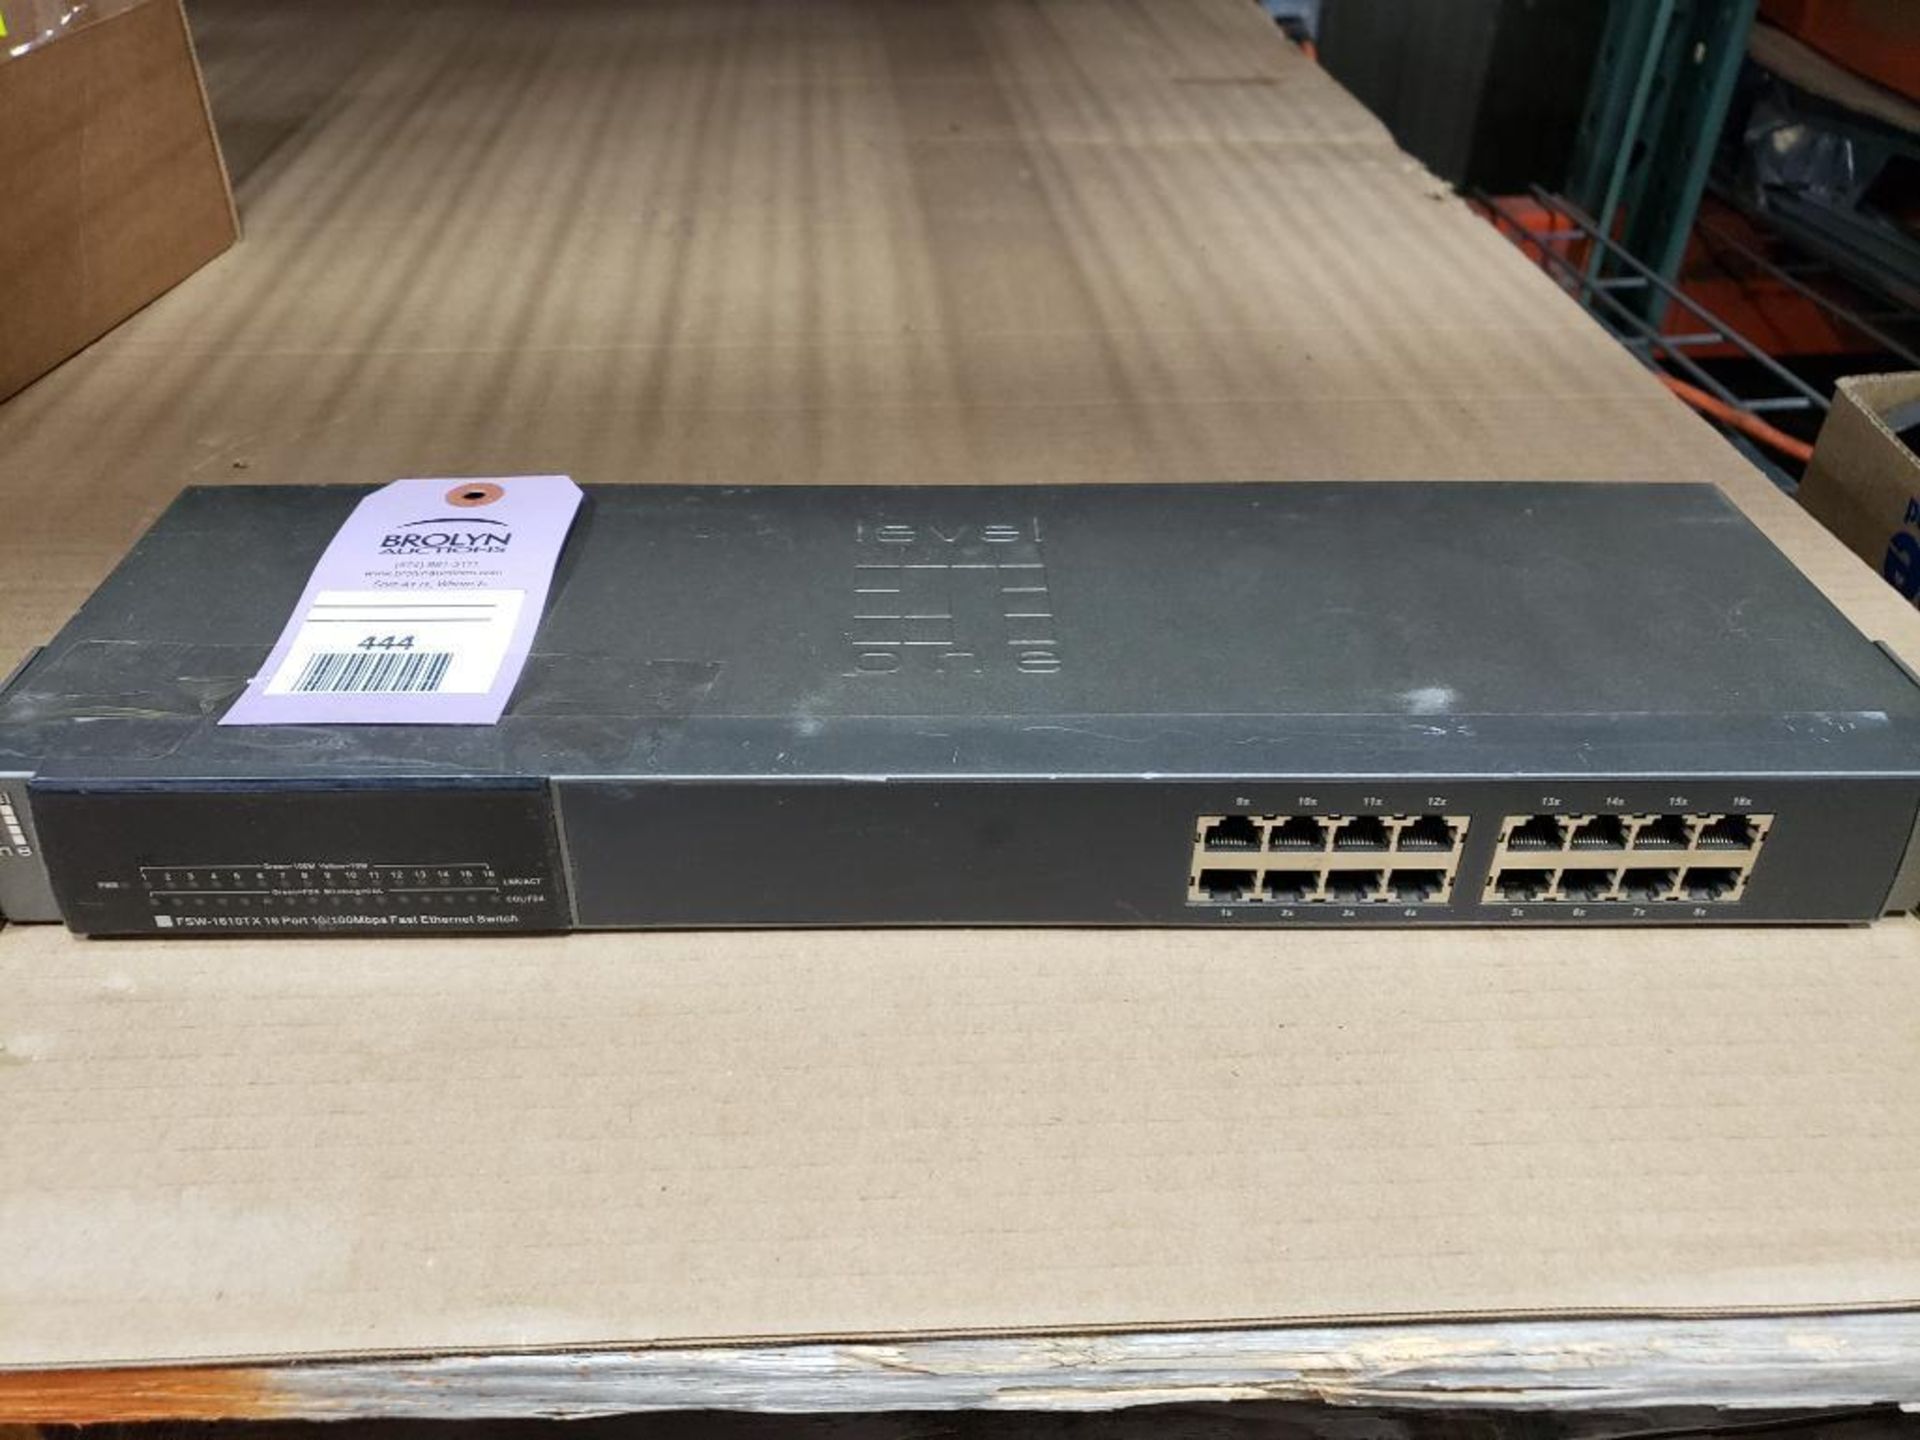 Level One FSW-1610TX 16-Port 10/100Mbps fast ethernet switch.